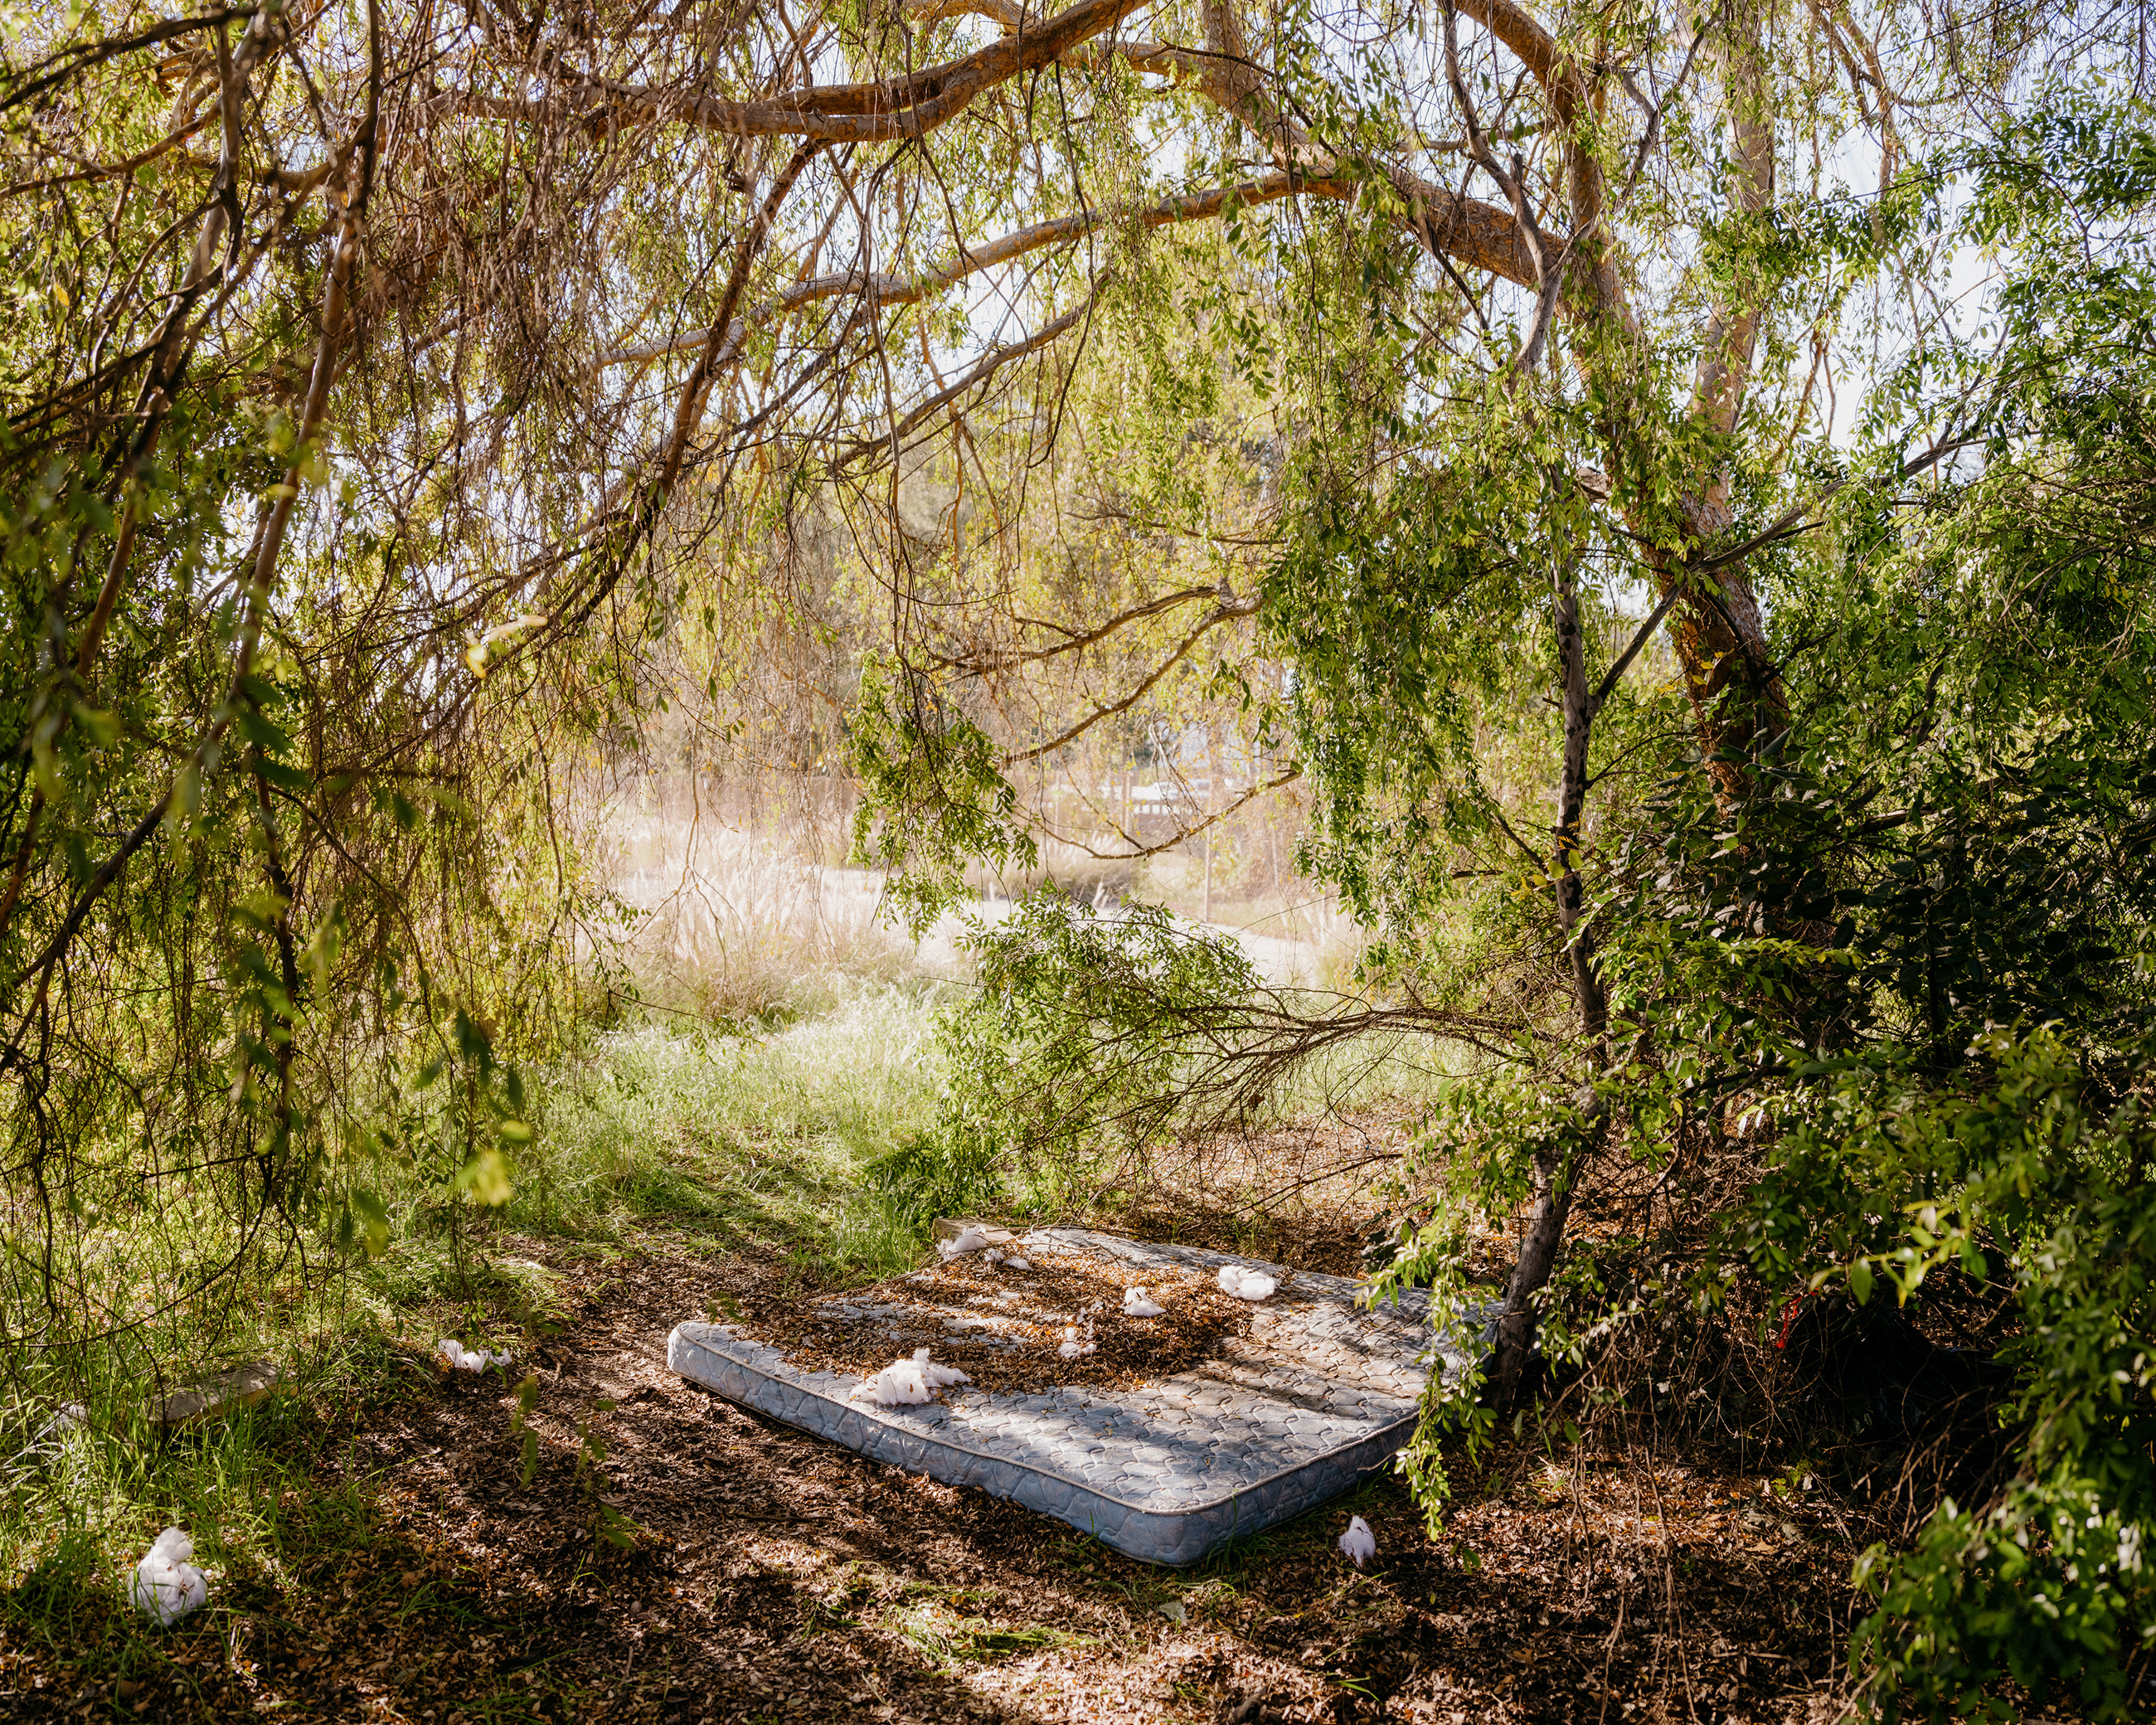 A bed under the willow trees, Burbank 2022